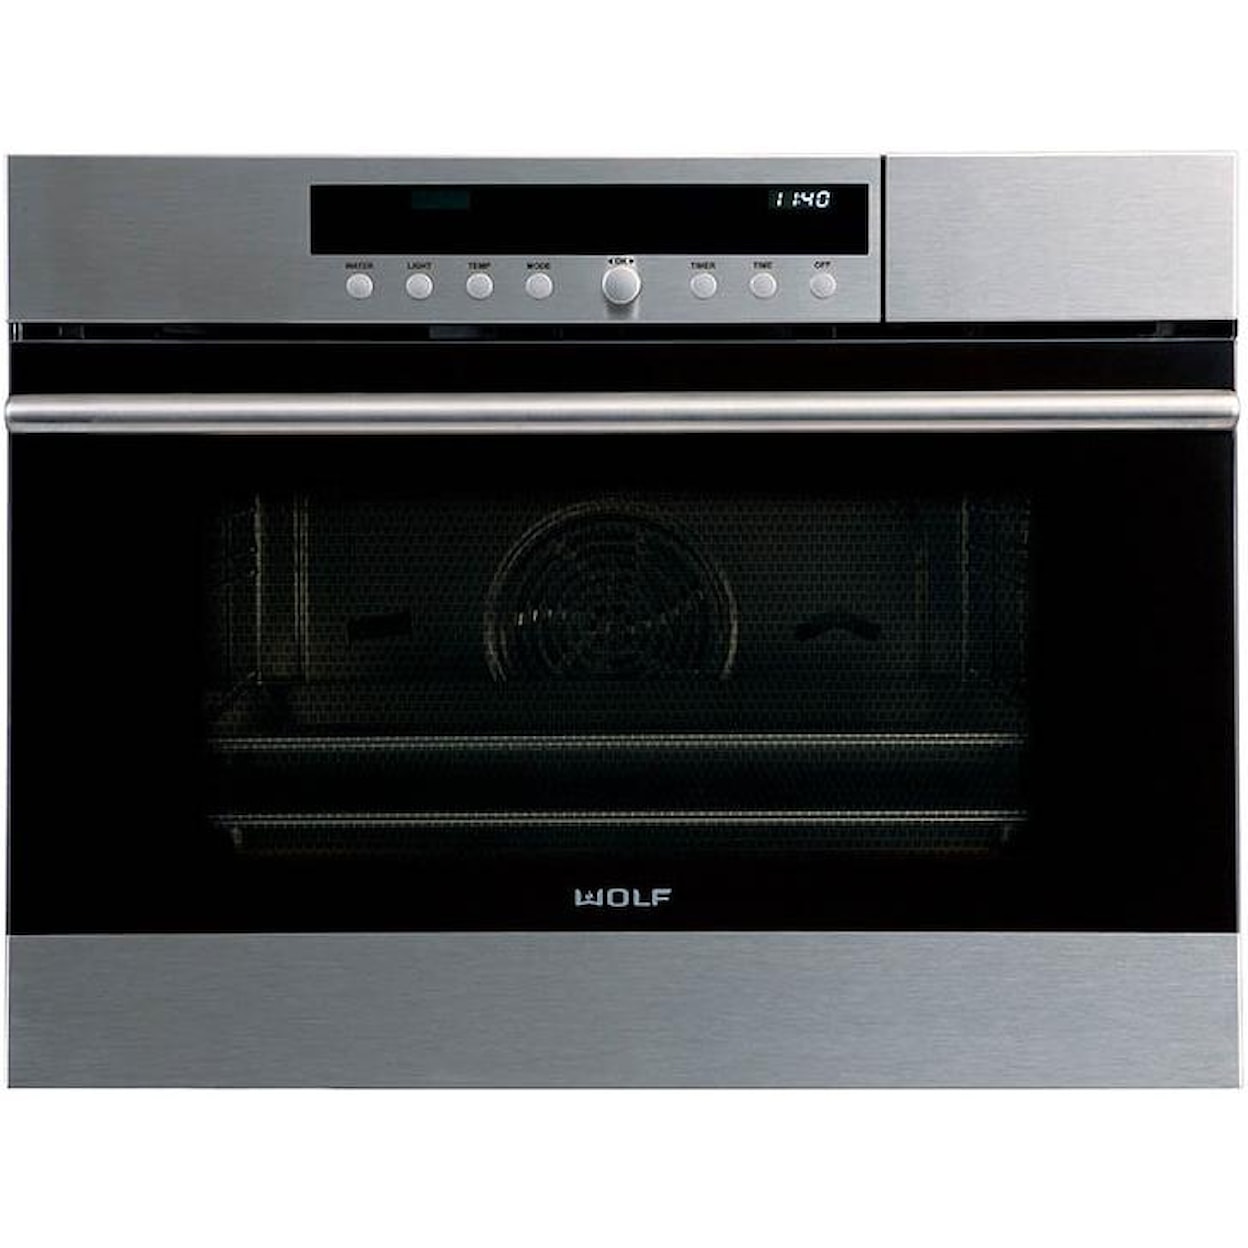 Wolf Steam Convection Oven 24" Built-In Single Electric Oven